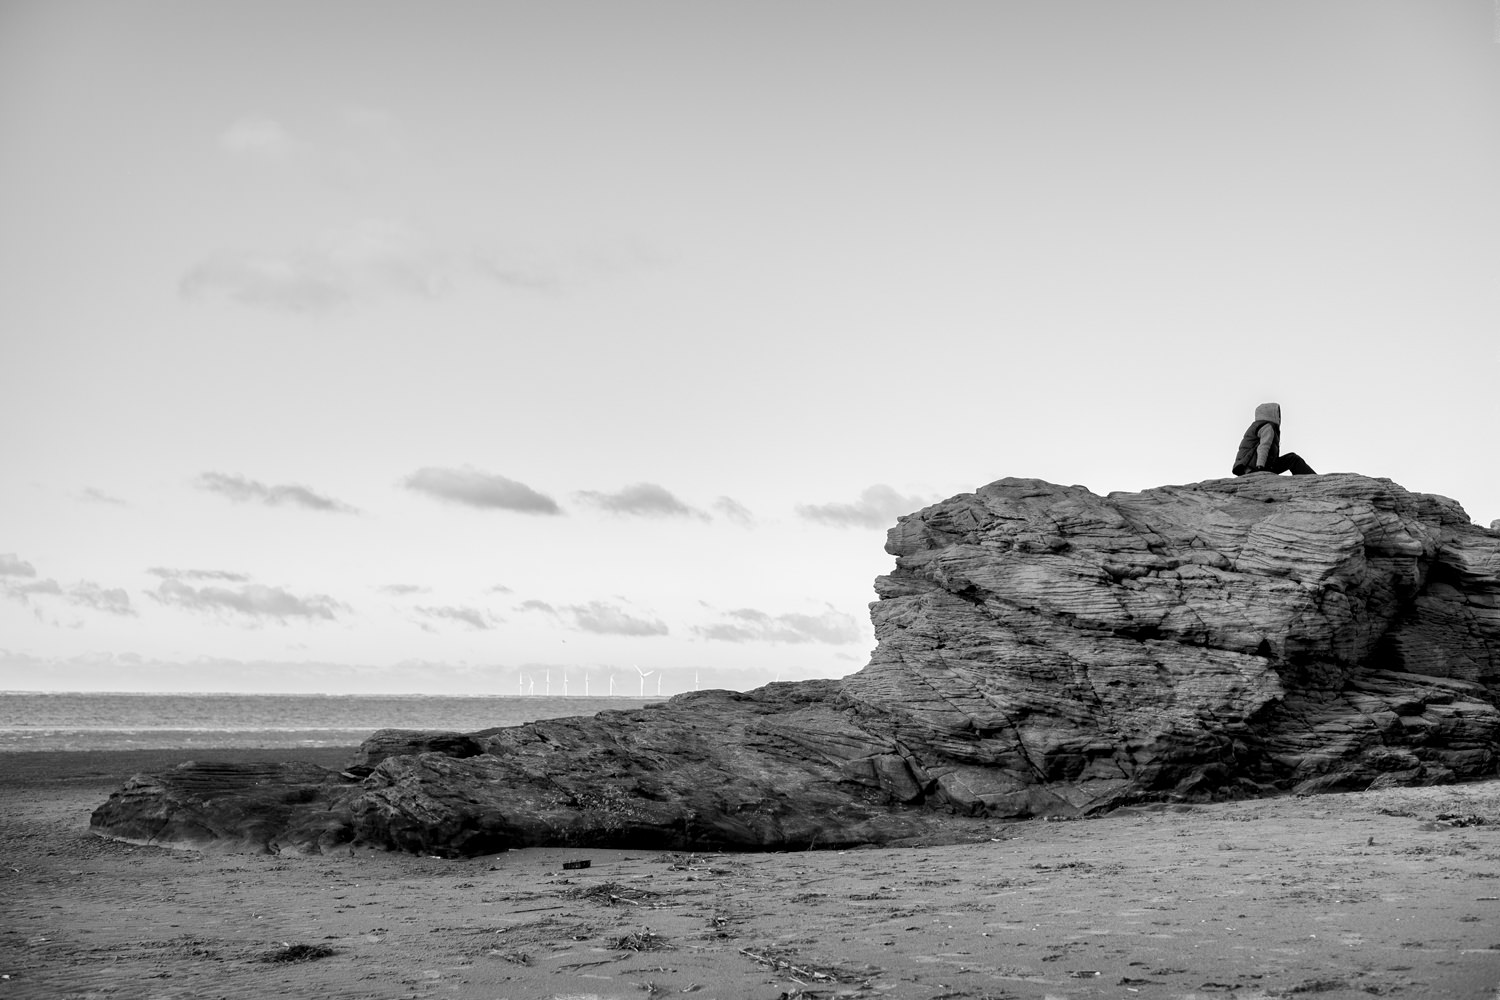 A boy sitting on top of a rocky outcrop, sitting side on to the camera. In the distance a wind farm can be seen out at sea